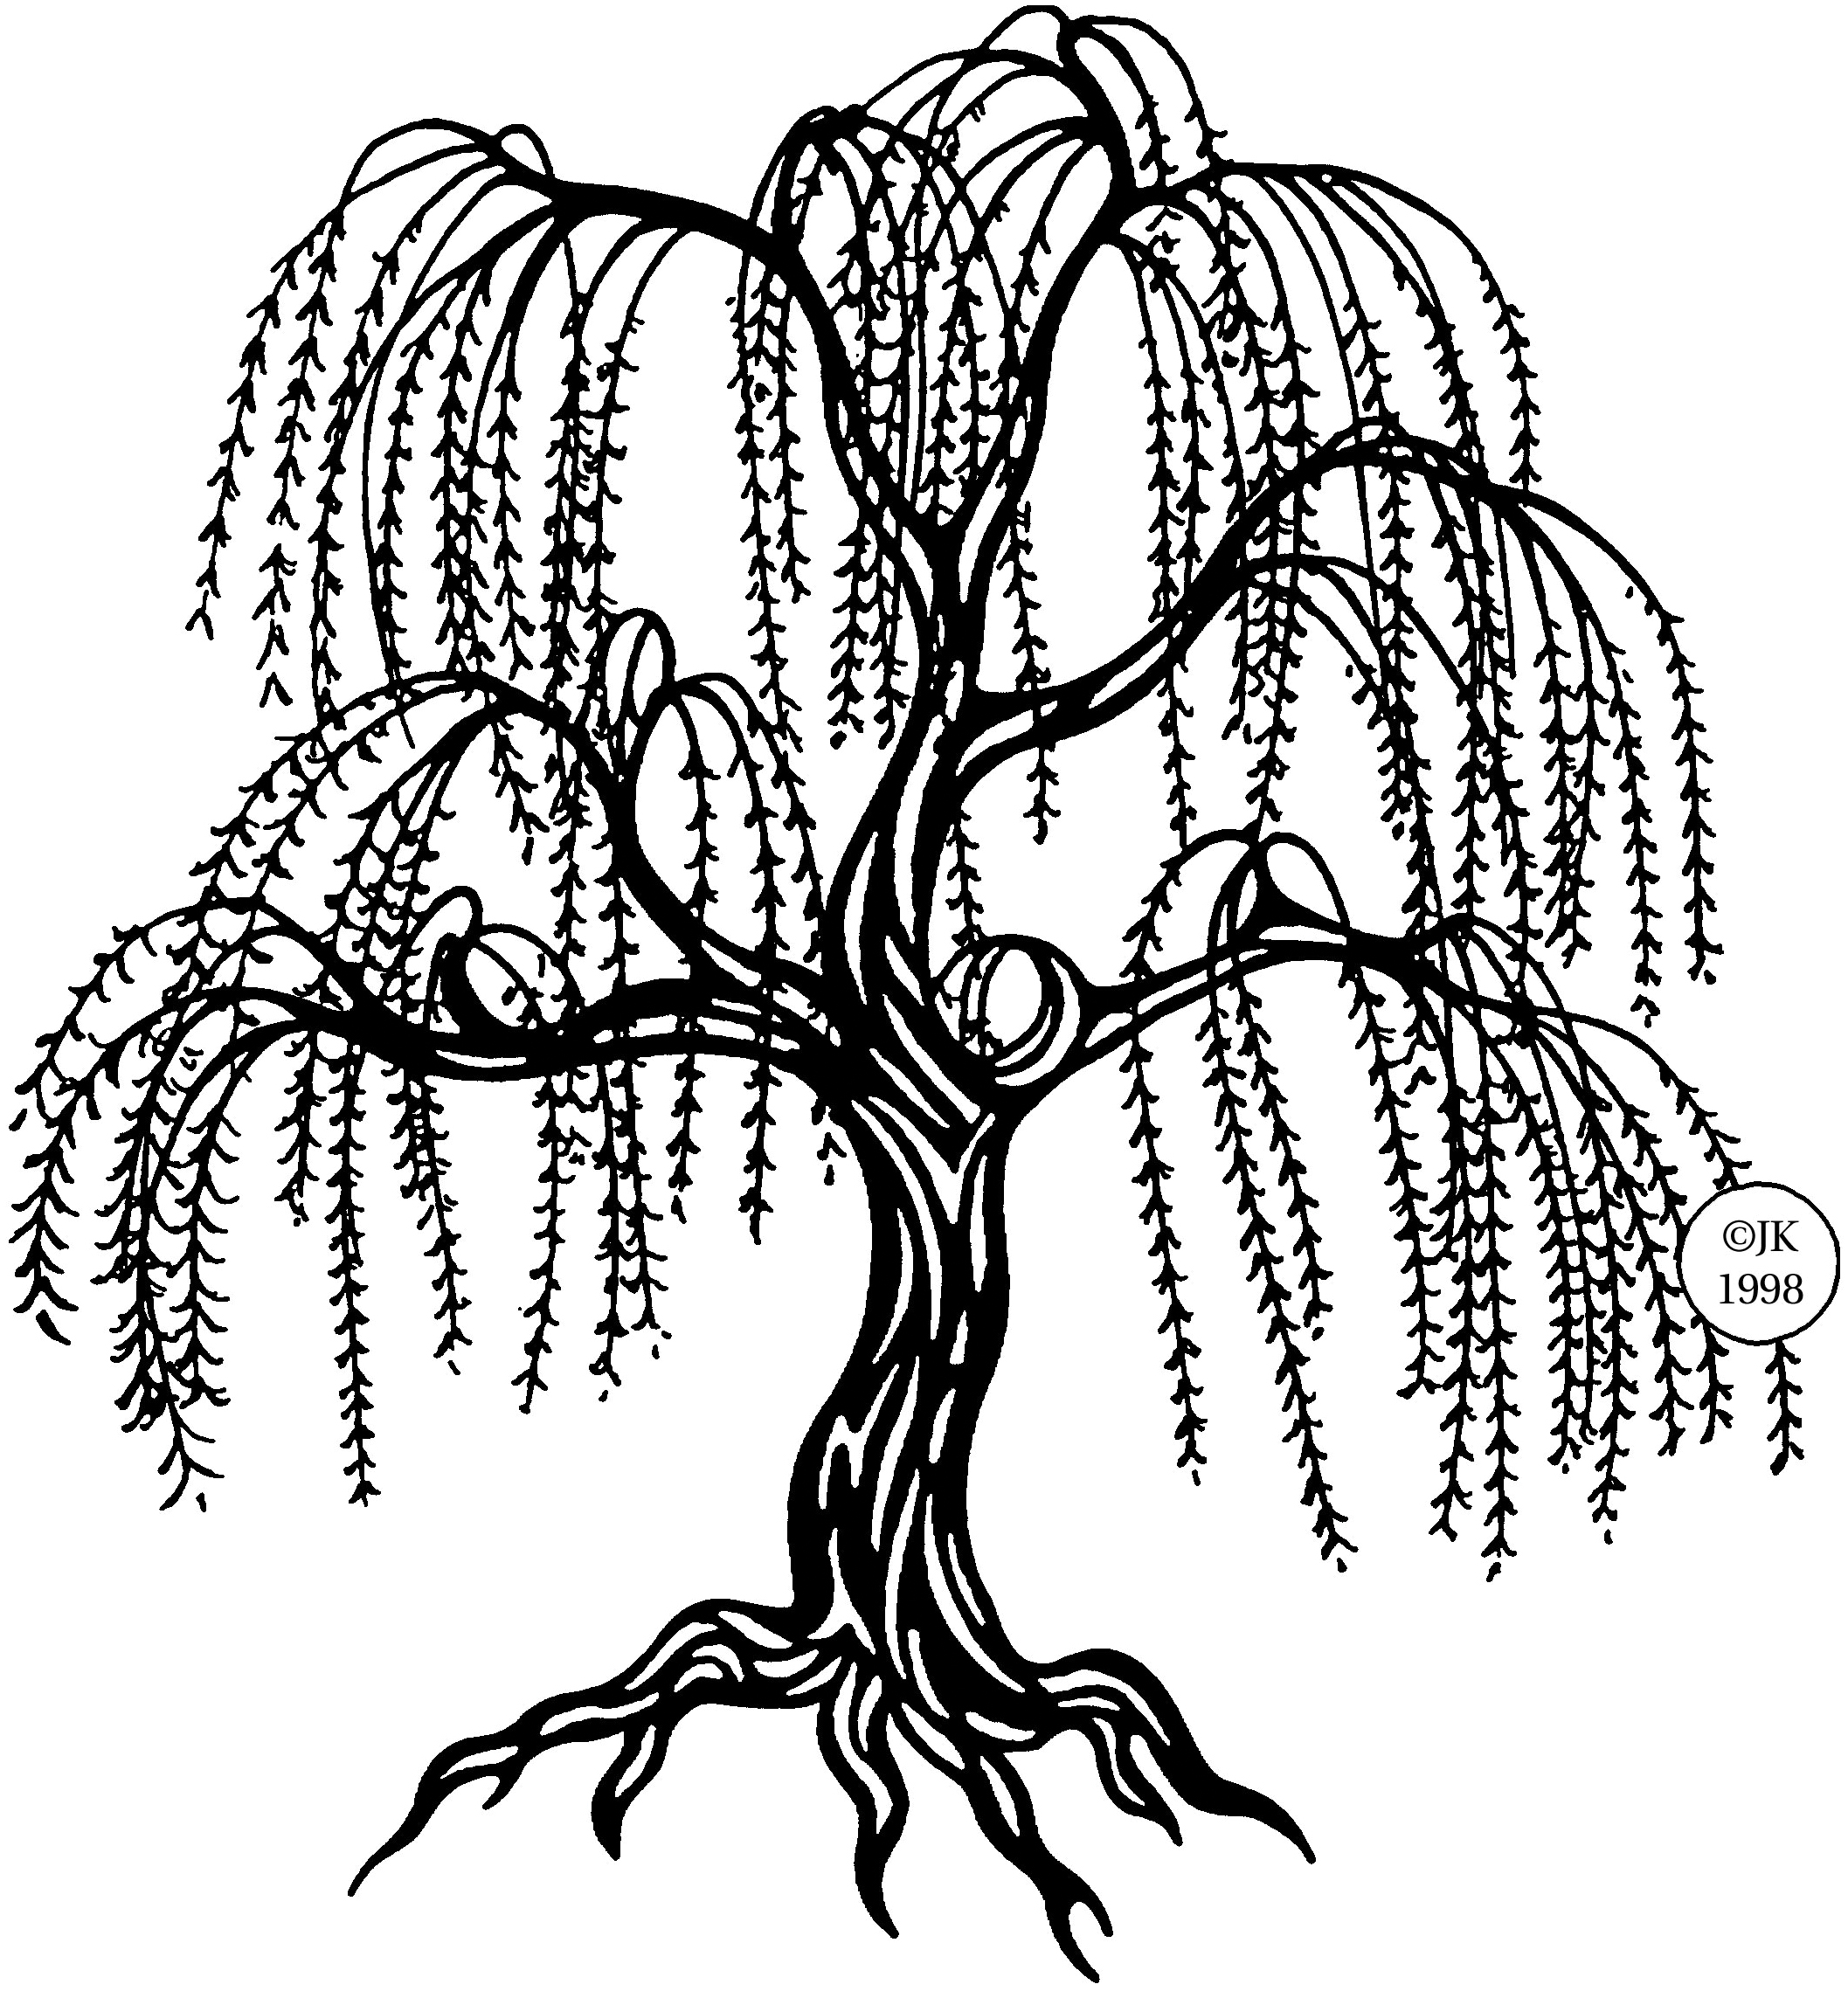 Free clipart willow tree